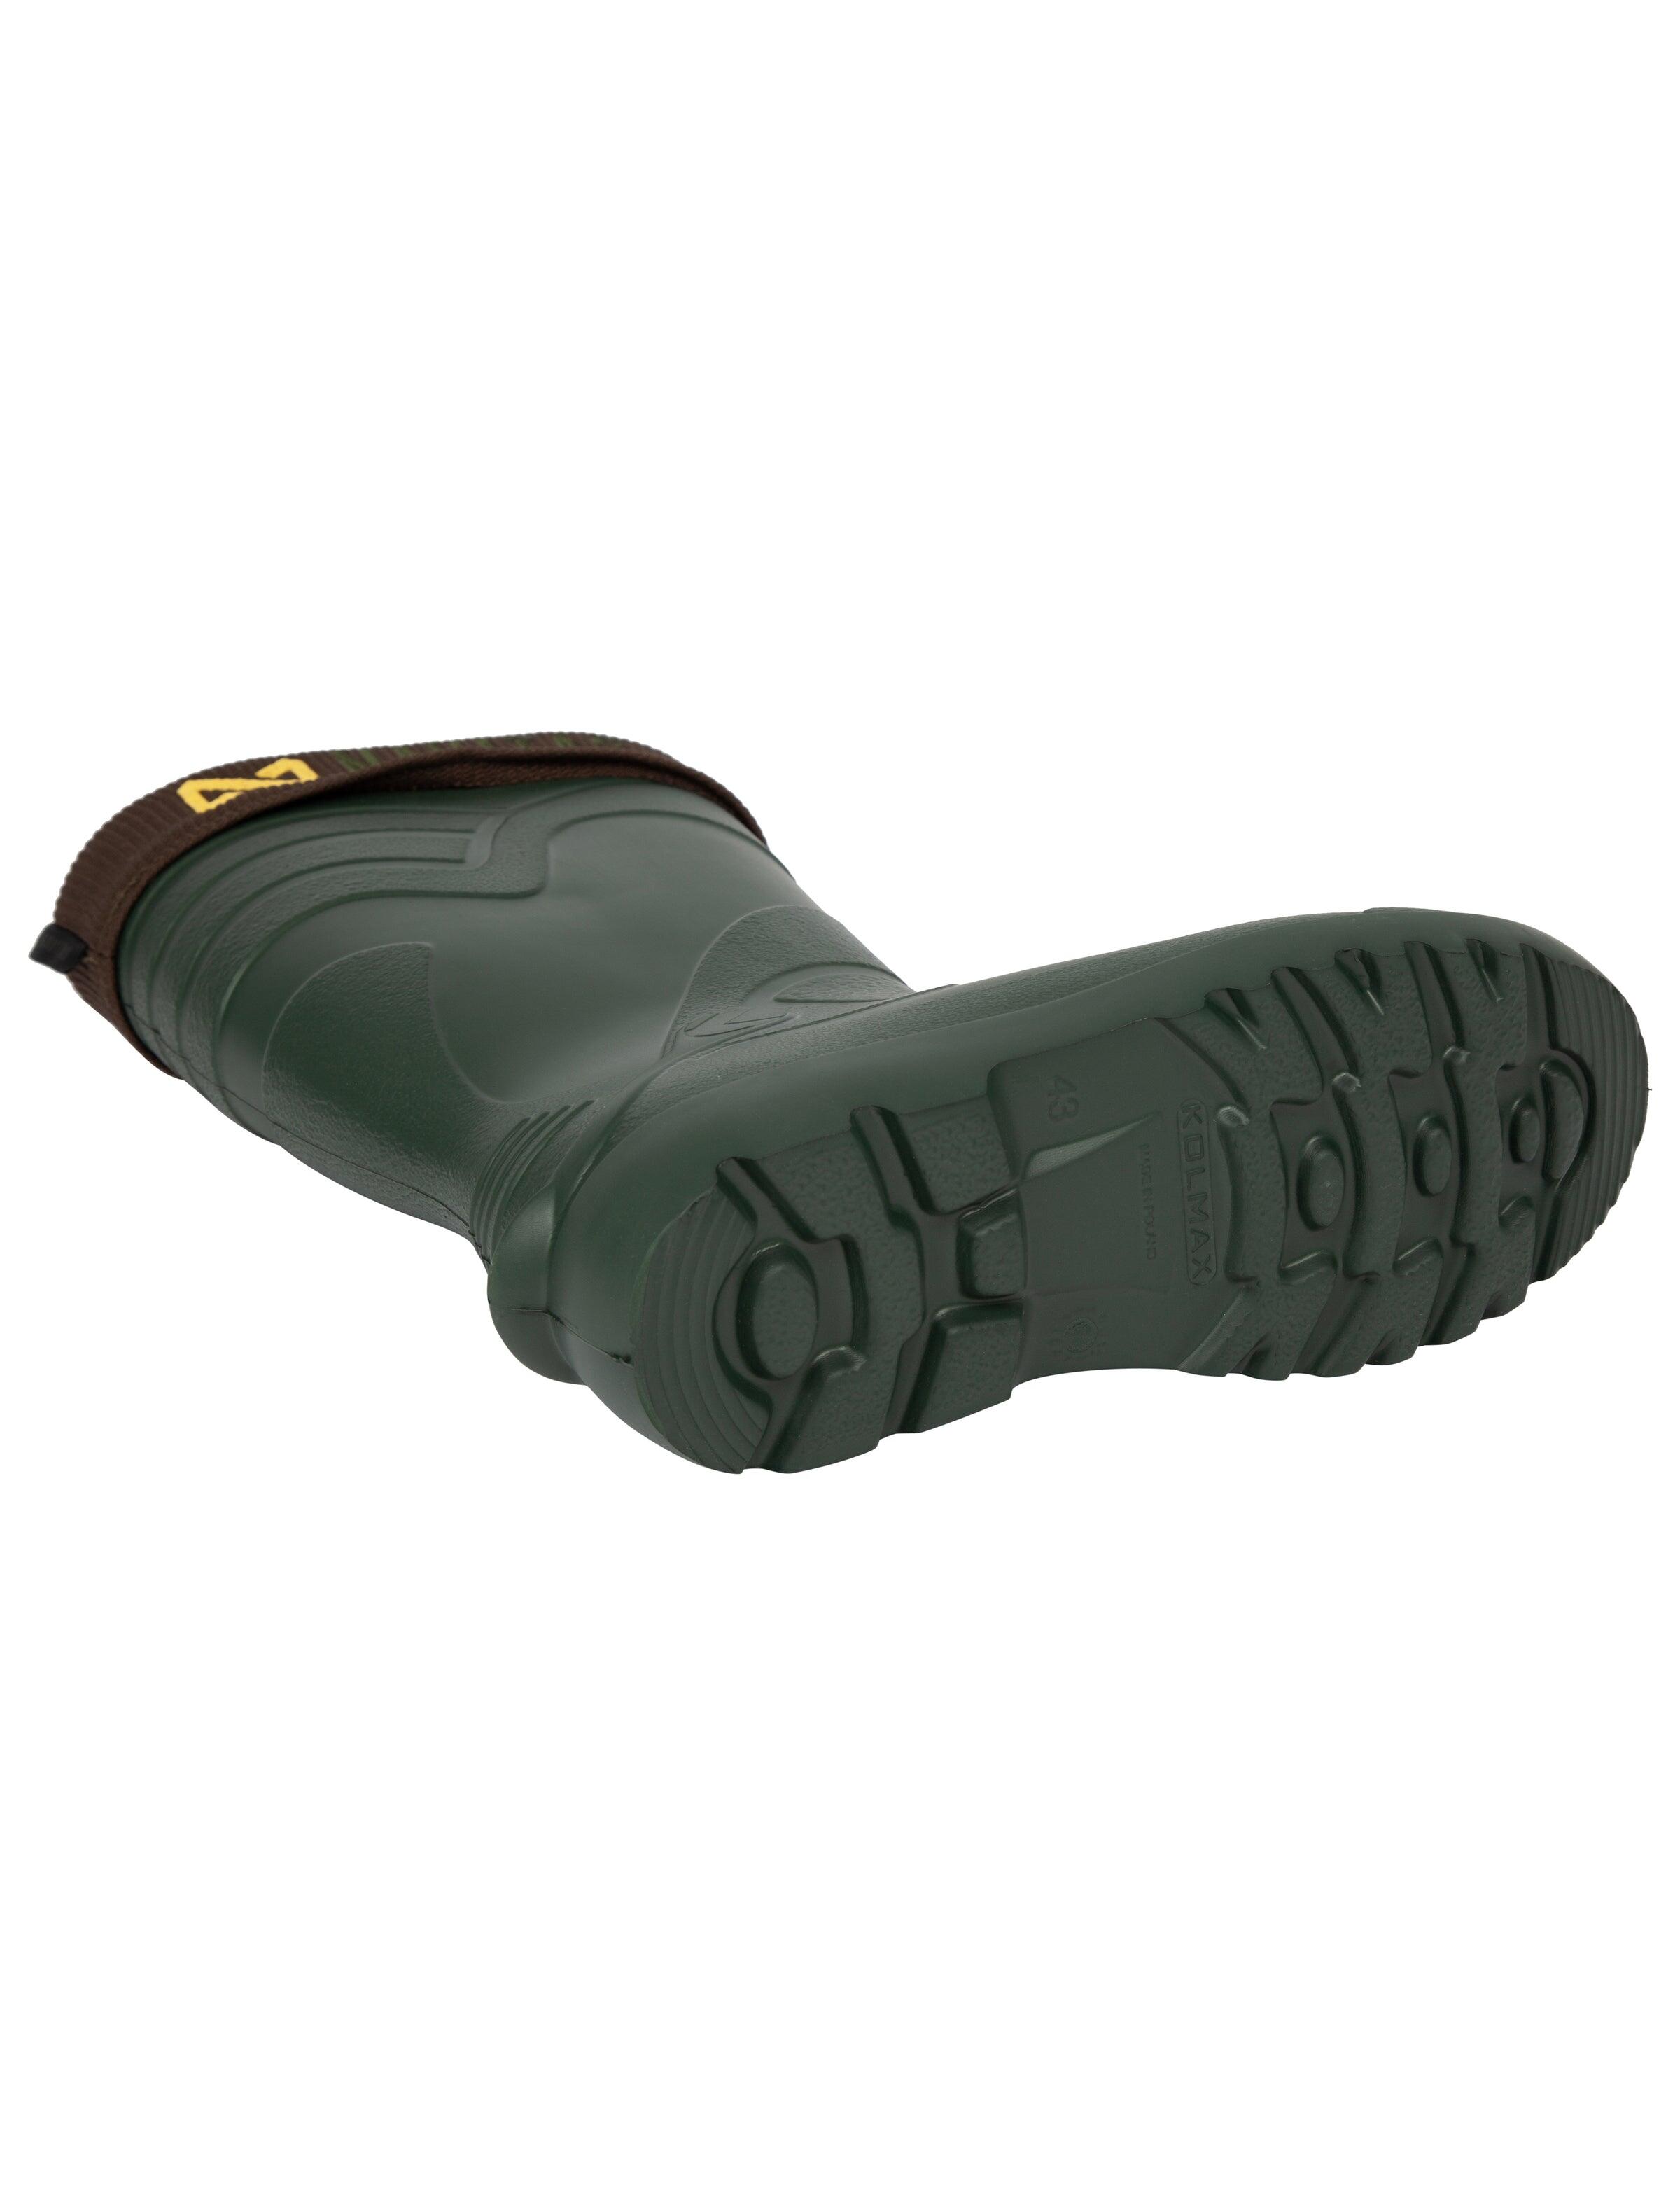 NVTS LITE Insulated Welly Boots 4/4